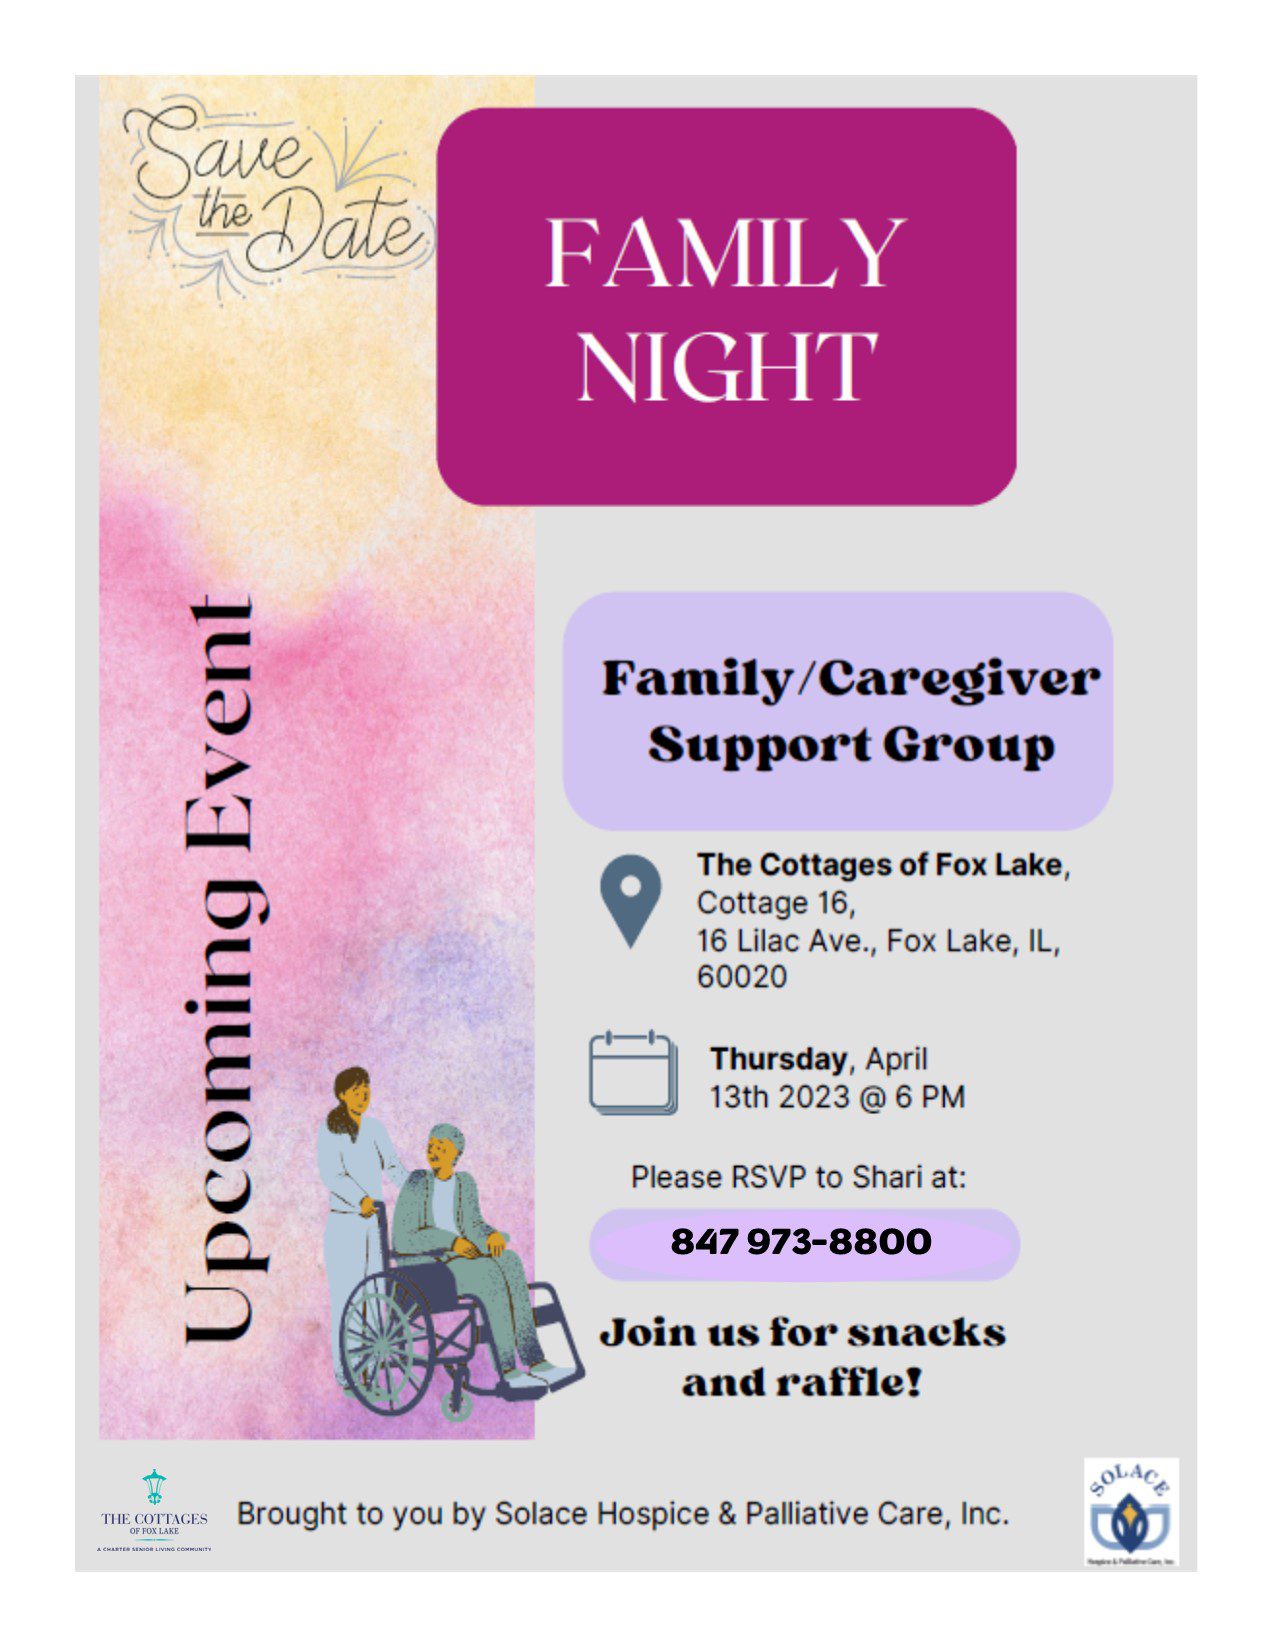 Cottages of Fox Lake - Assisted Living and Memory Care - Family - Caregiver Support Group April 2023